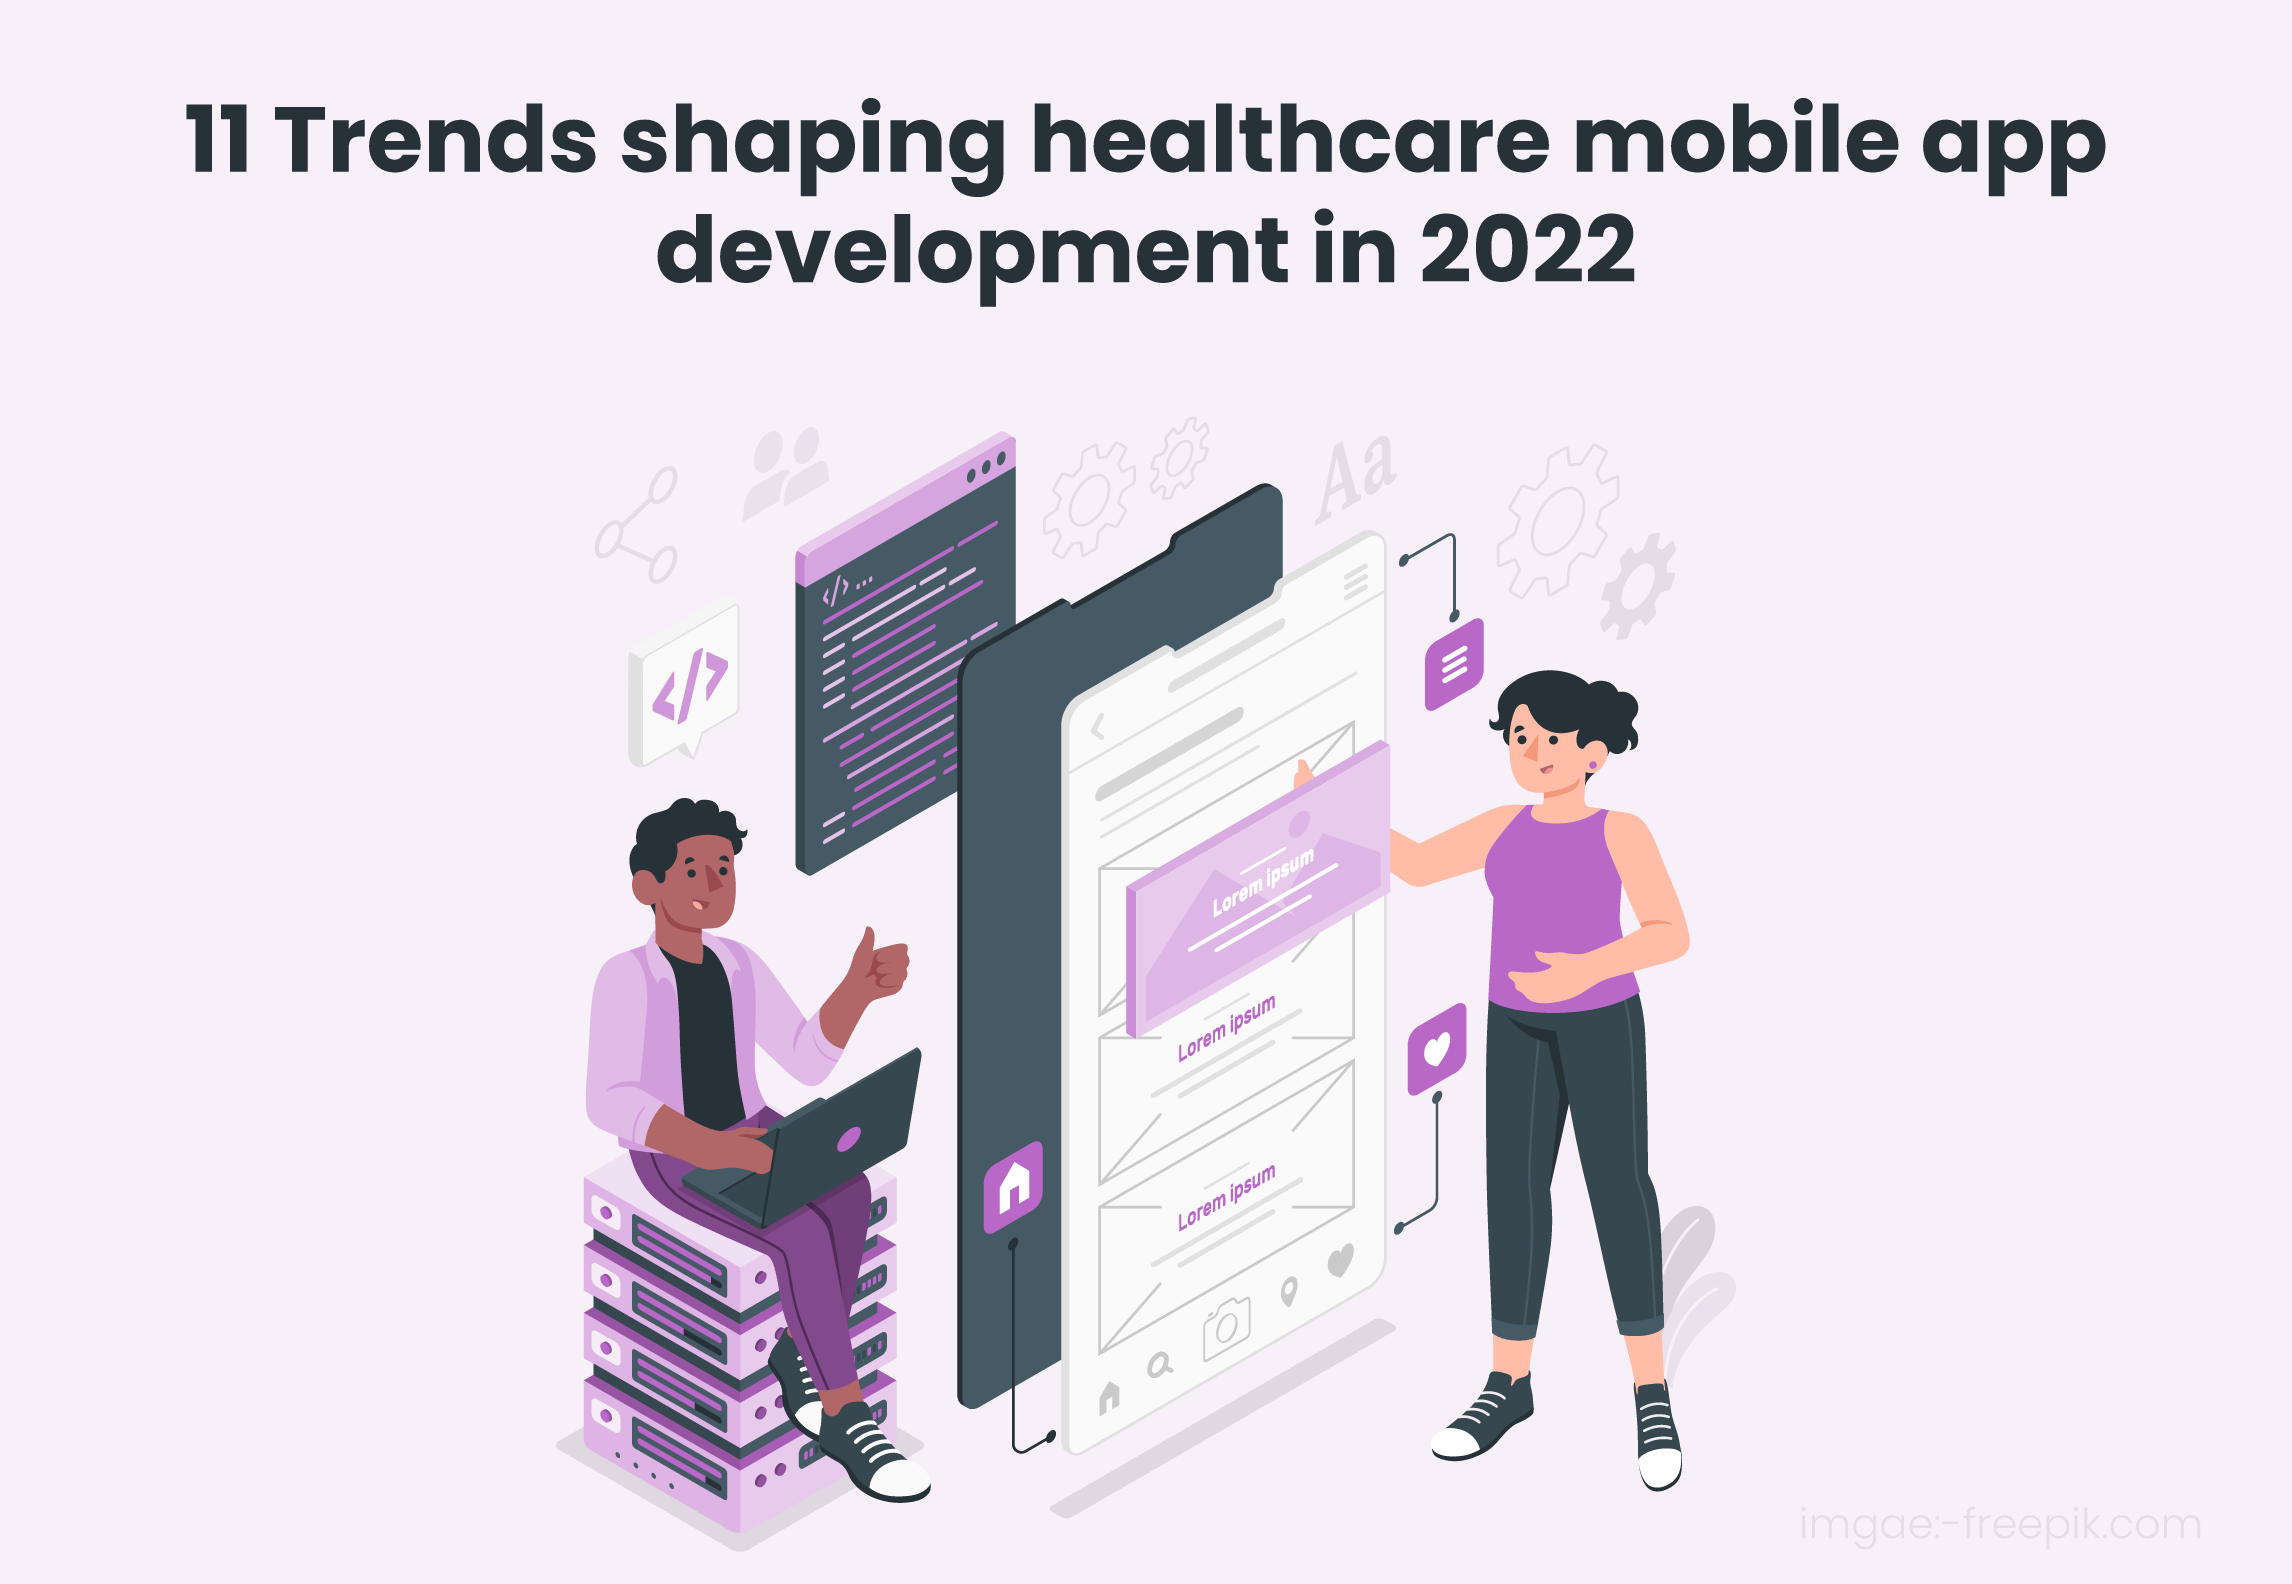 These 11 trends shaped Healthcare Mobile App Development in 2022